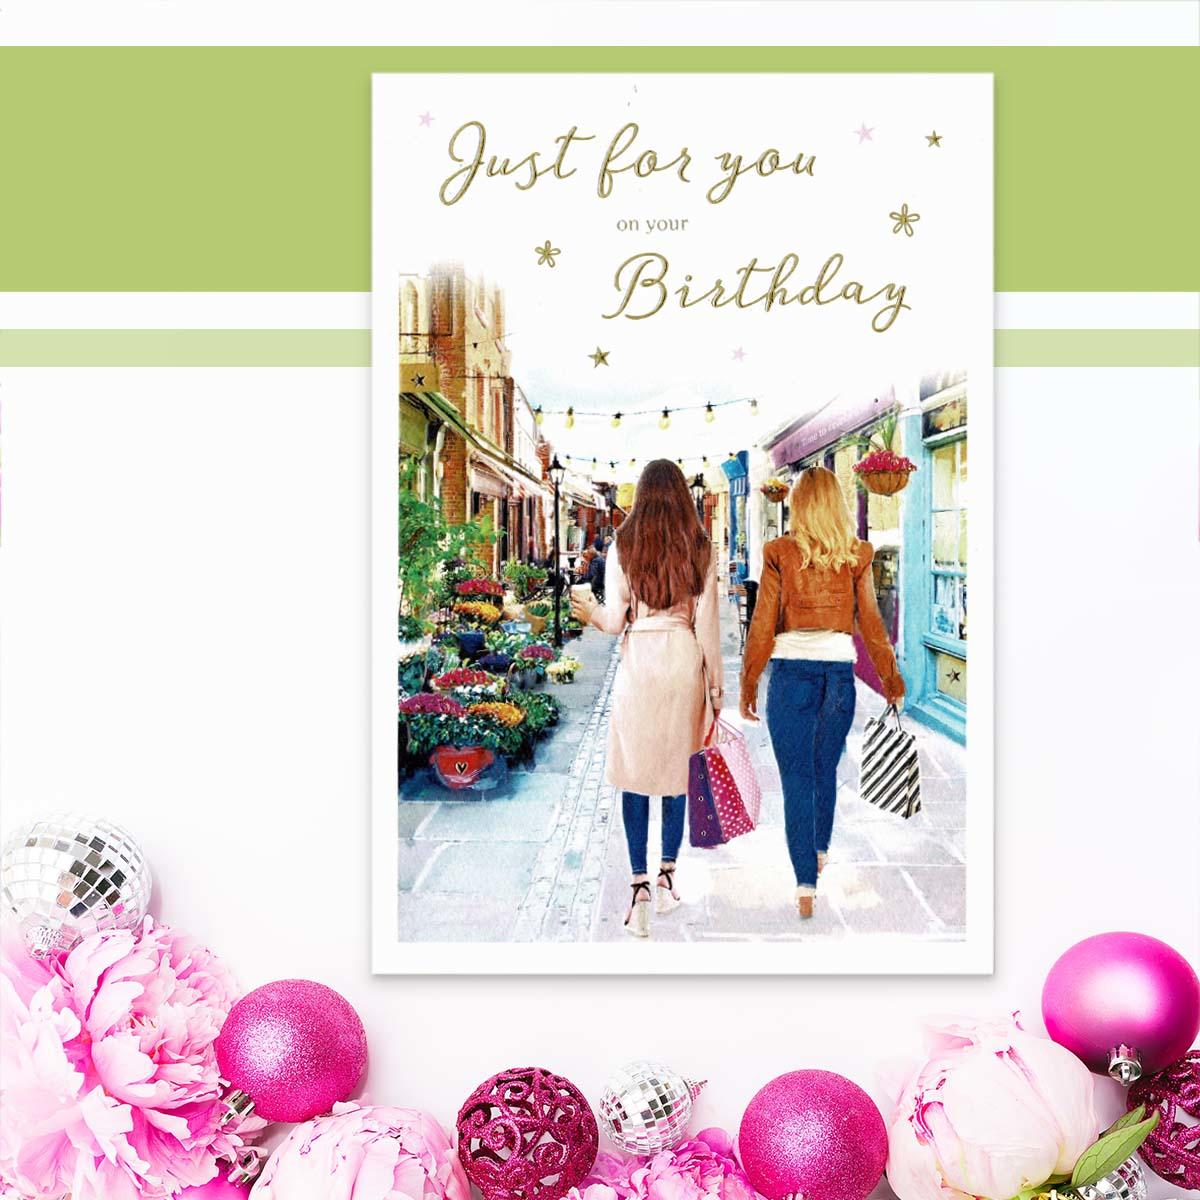 Essence - Just For You Birthday Retail Therapy Card Front Image